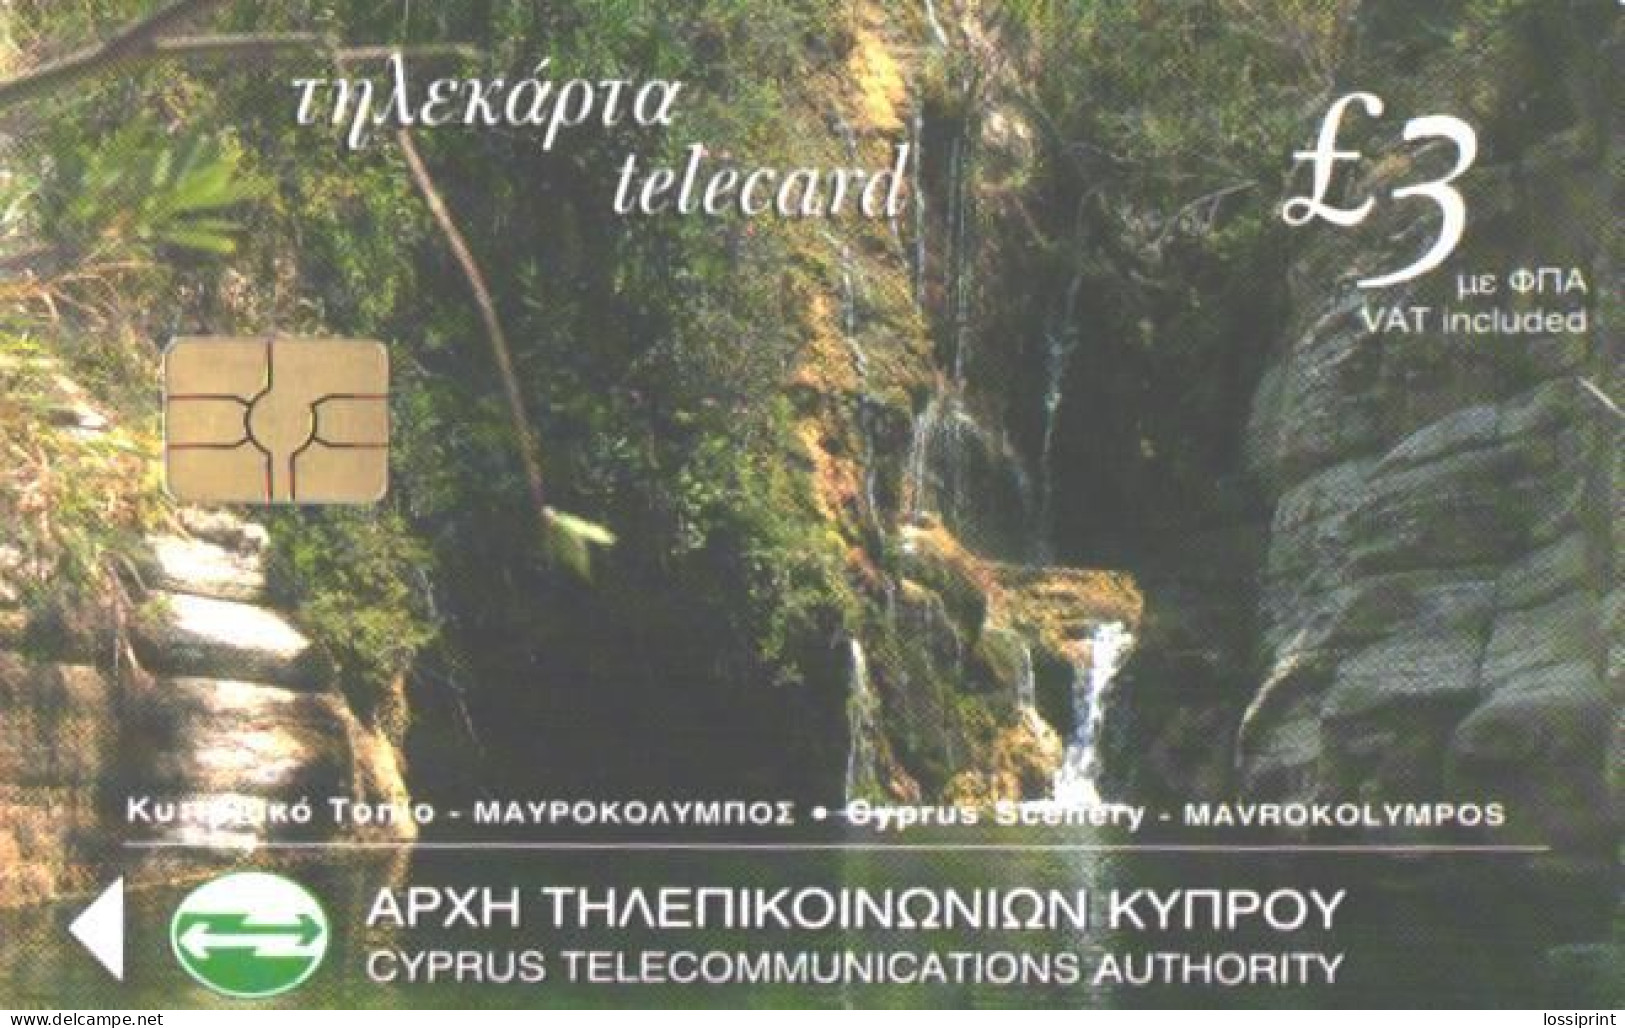 Cyprus:Used Phonecard, Cyprus Telecommunications Authority, 3£, Sunset, Waterfall, 2001 - Landscapes